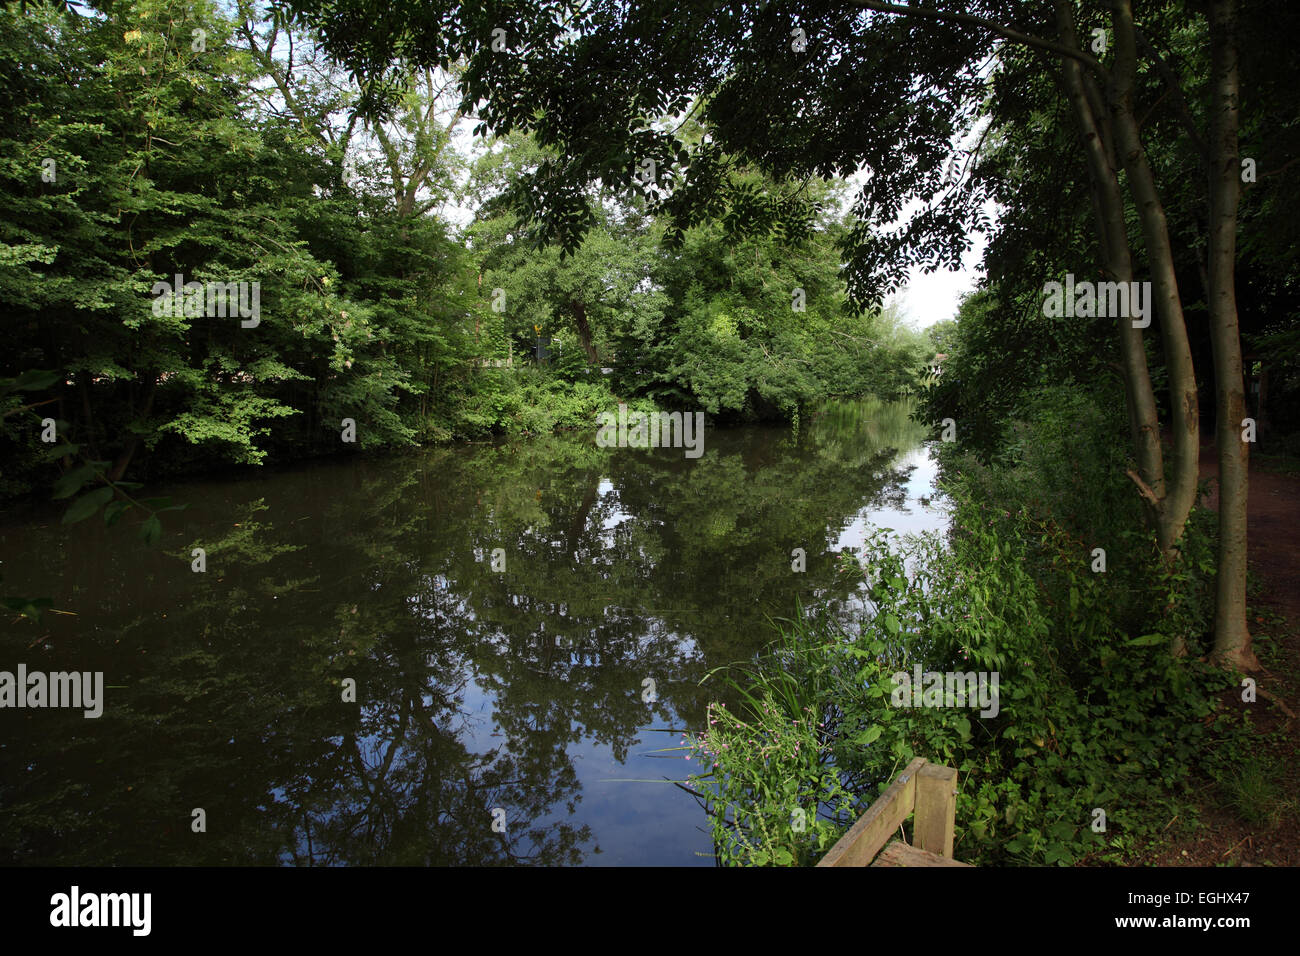 Angelsee im Lido Park in Droitwich, Worcestershire Stockfoto